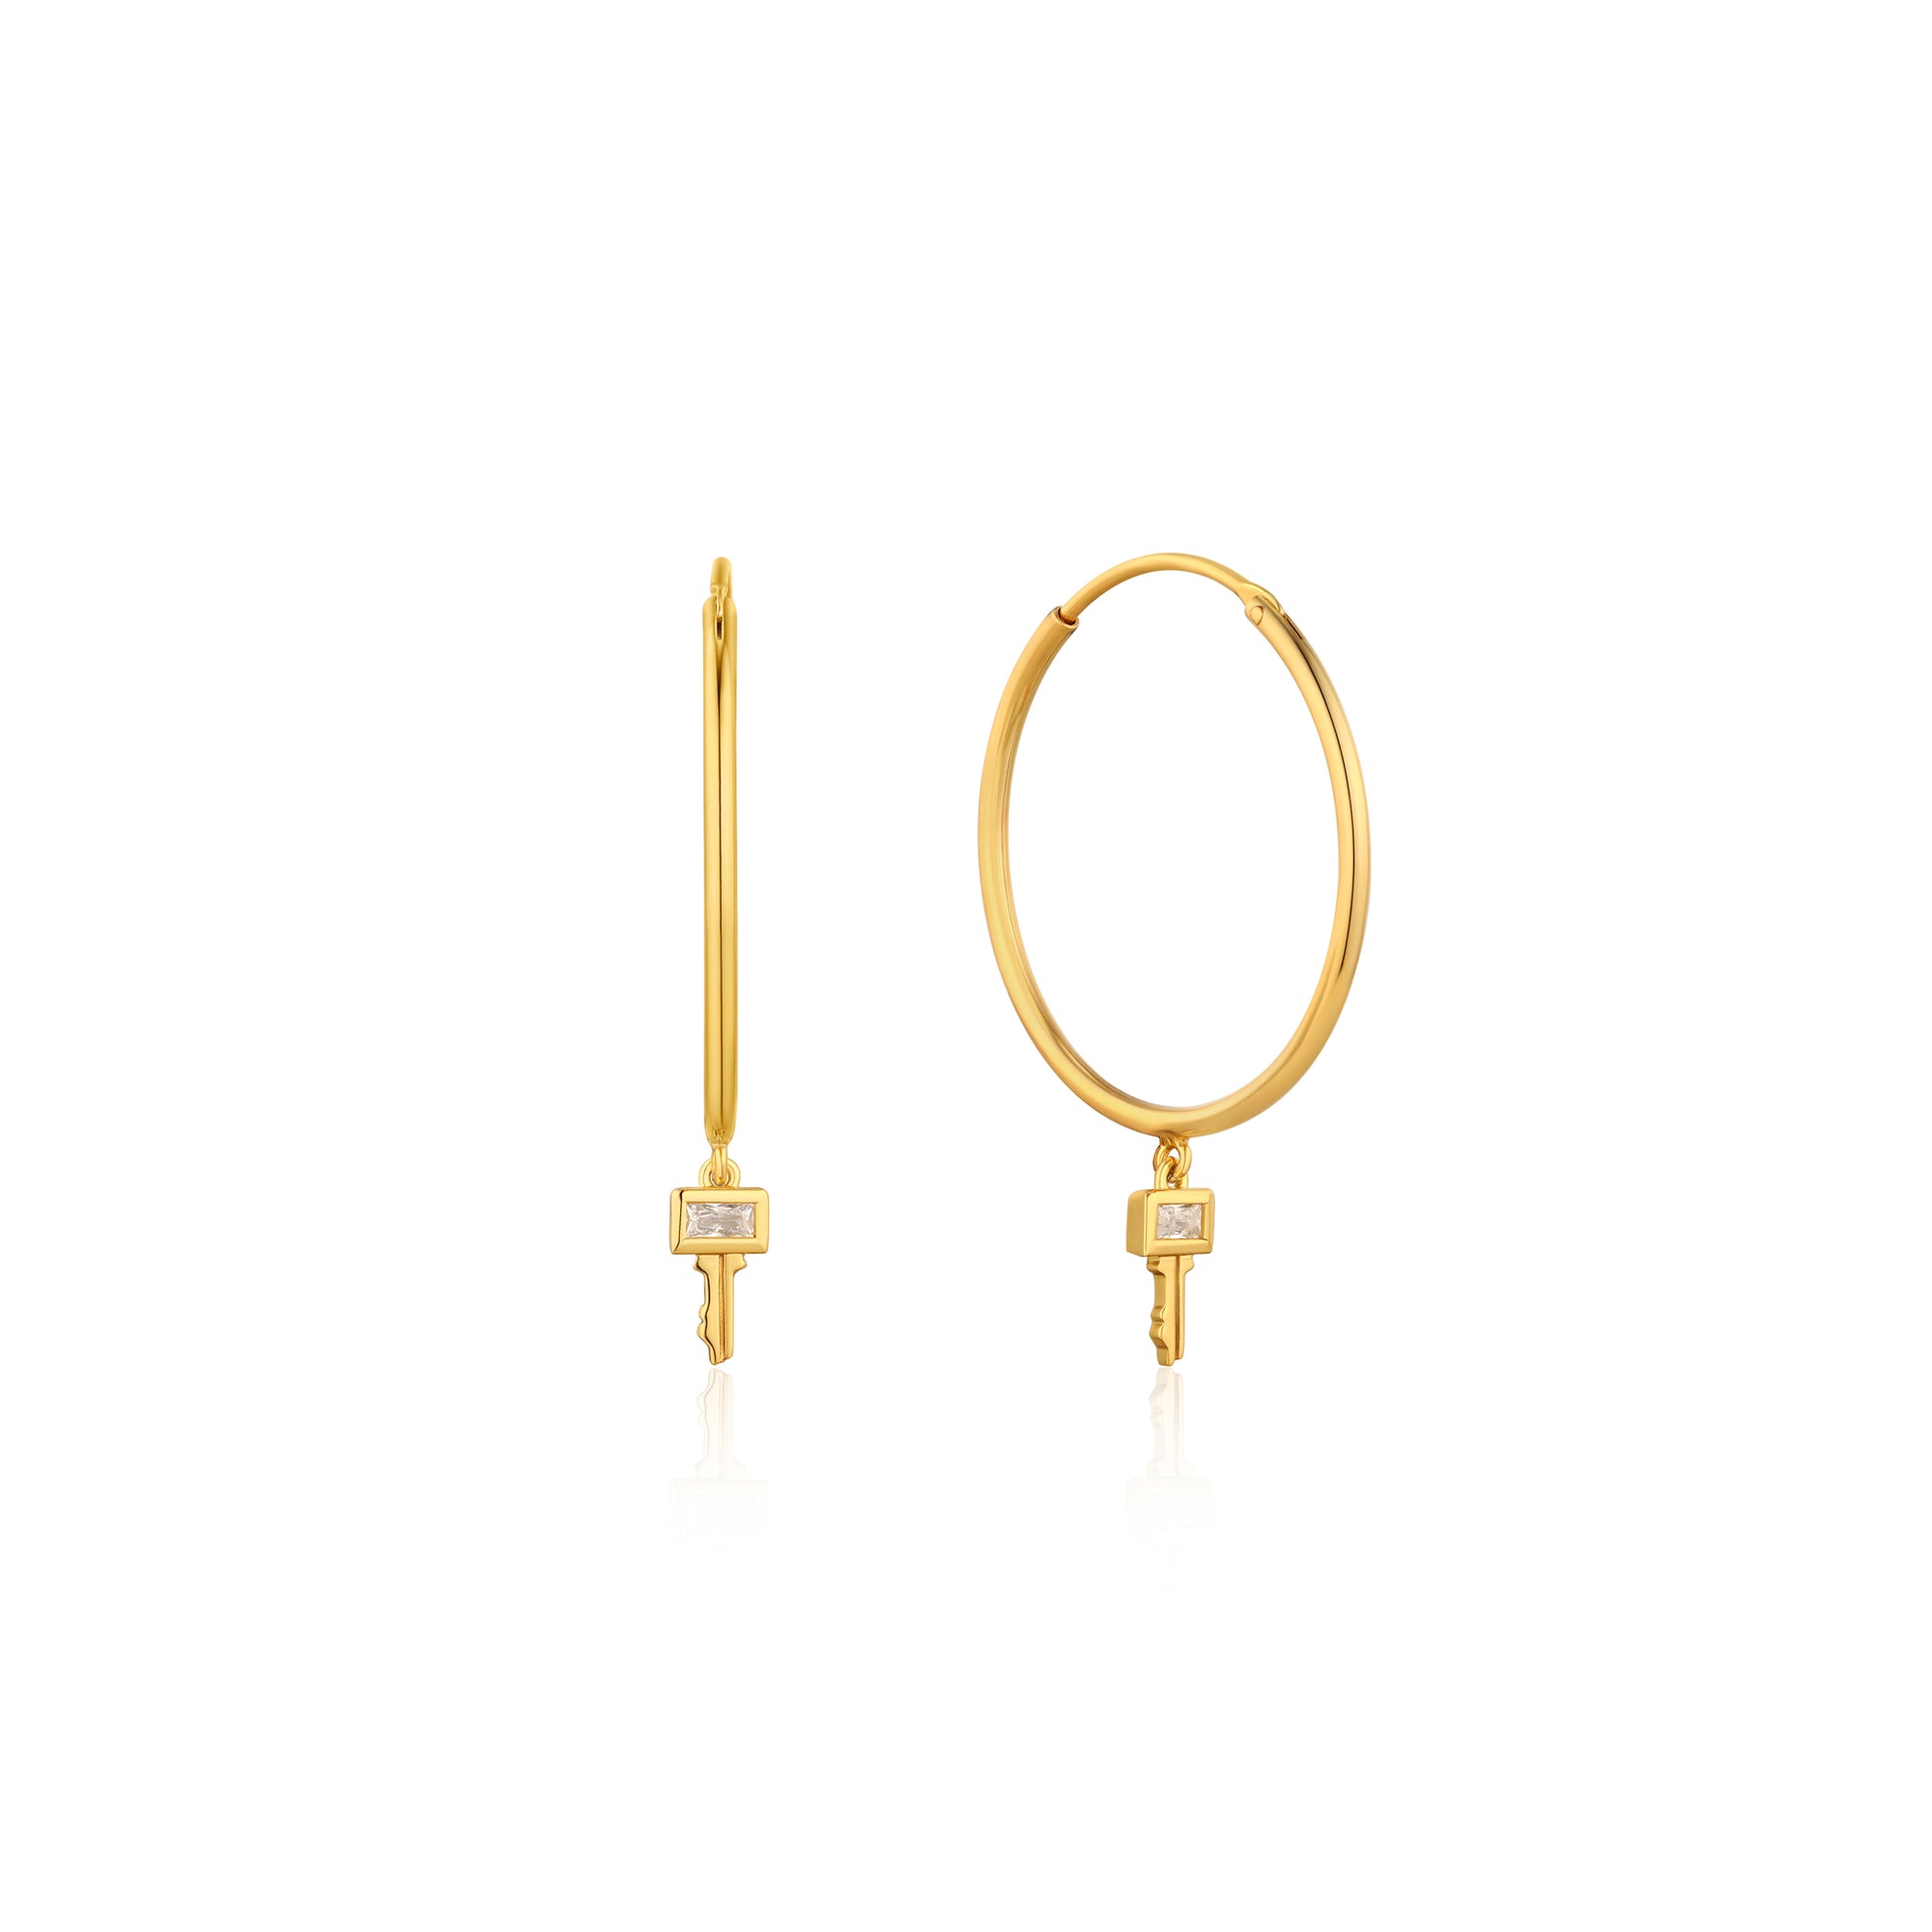 ANIA HAIE ANIA HAIE - Gold Key Hoop Earrings available at The Good Life Boutique